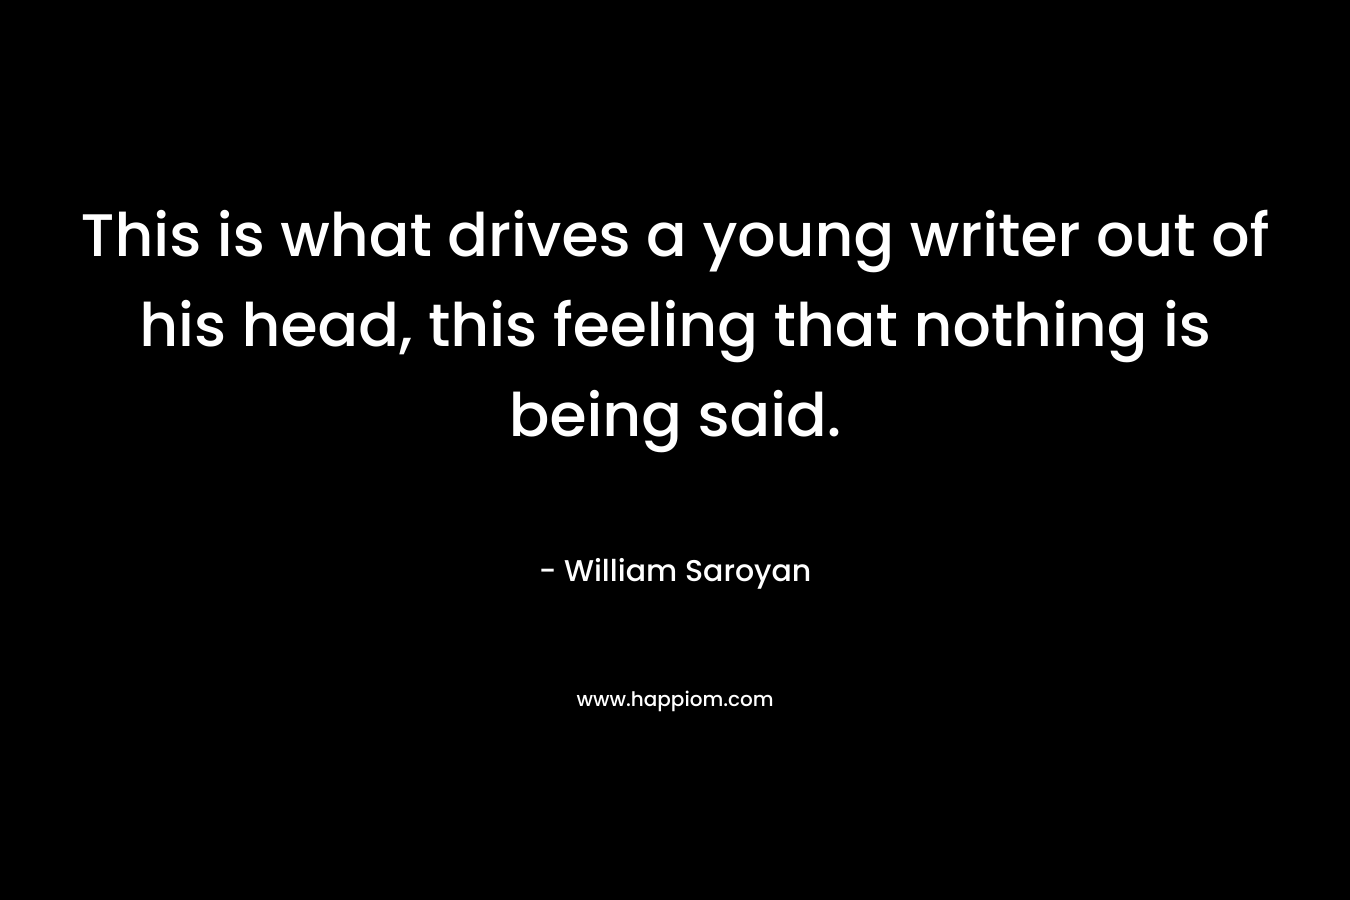 This is what drives a young writer out of his head, this feeling that nothing is being said. – William Saroyan